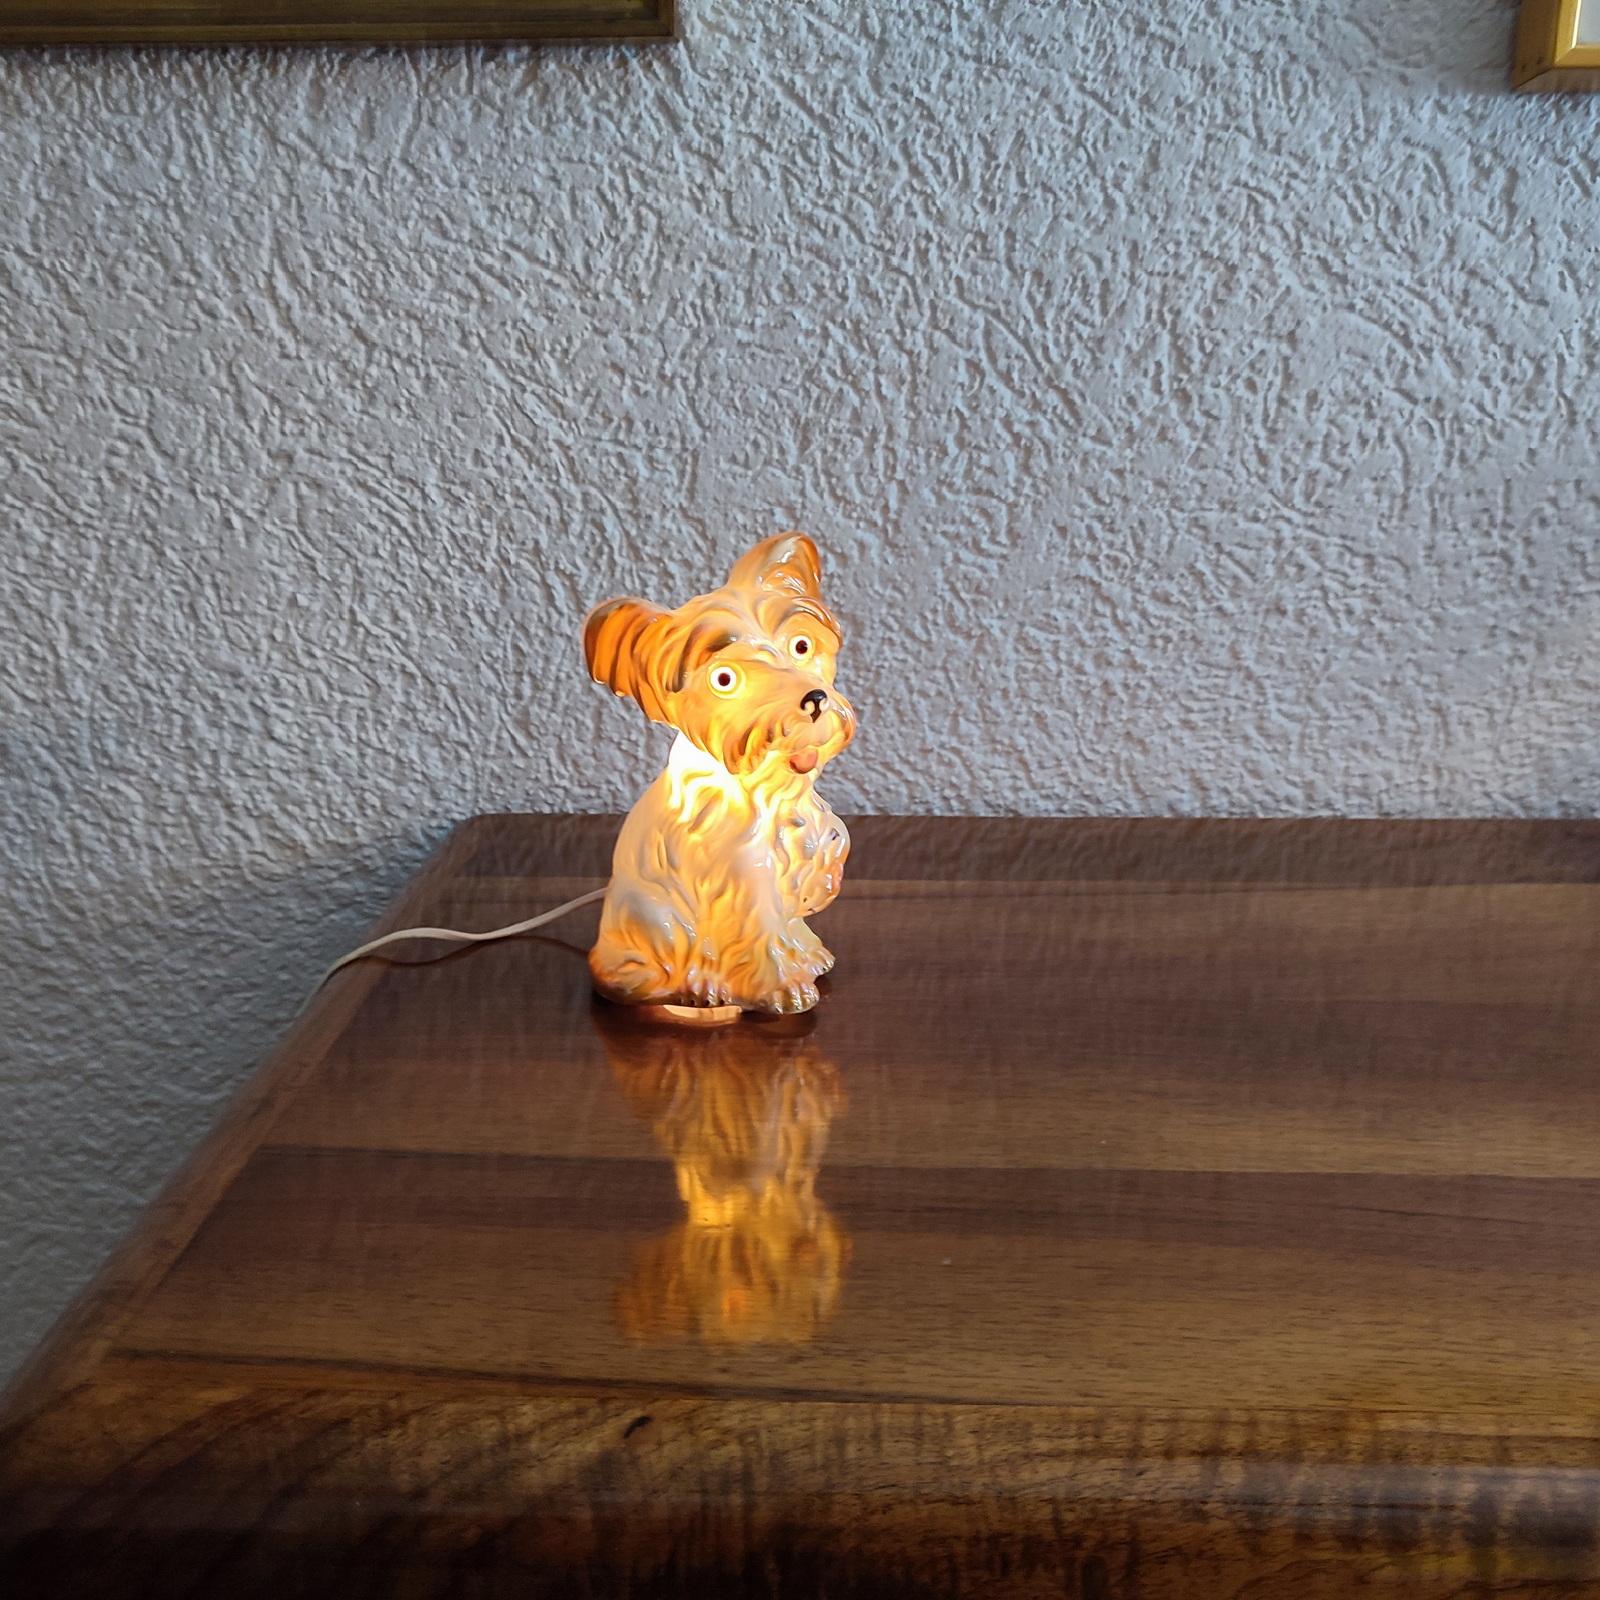 Rare find, a dog perfume lamp attributed to Carl Scheidig Grafenthal, Germany. 
Porcelain figurine, with luster glaze. E14 bulb base. European plug. It can be usd in the US with proper light bulb and with a plug adapter.
Excellent condition, lamp is